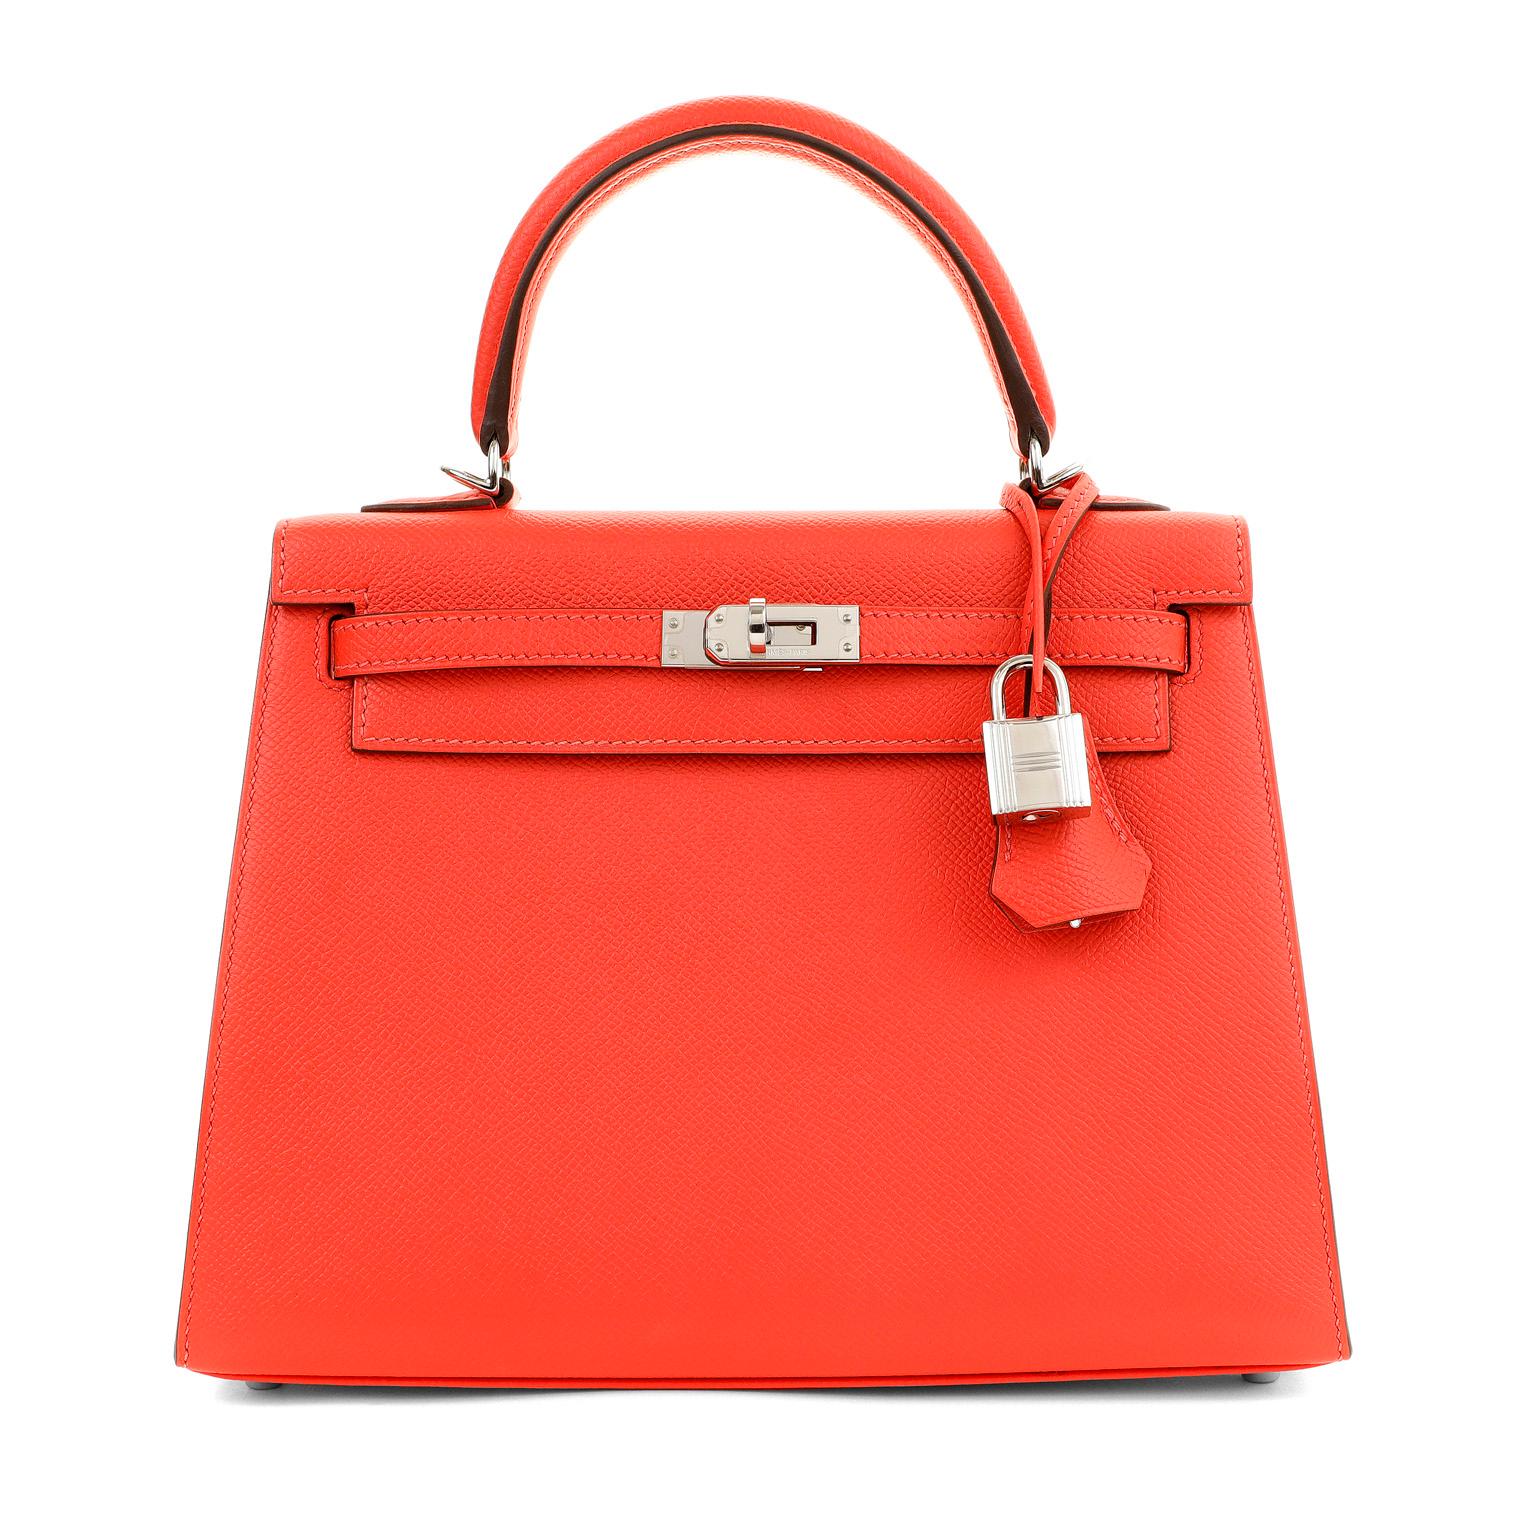 This authentic Hermès 25 cm Rose Jaipur Epsom  Kelly Sellier is in pristine condition with the protective plastic intact on the hardware.     Hermès bags are considered the ultimate luxury item worldwide.  Each piece is handcrafted with waitlists